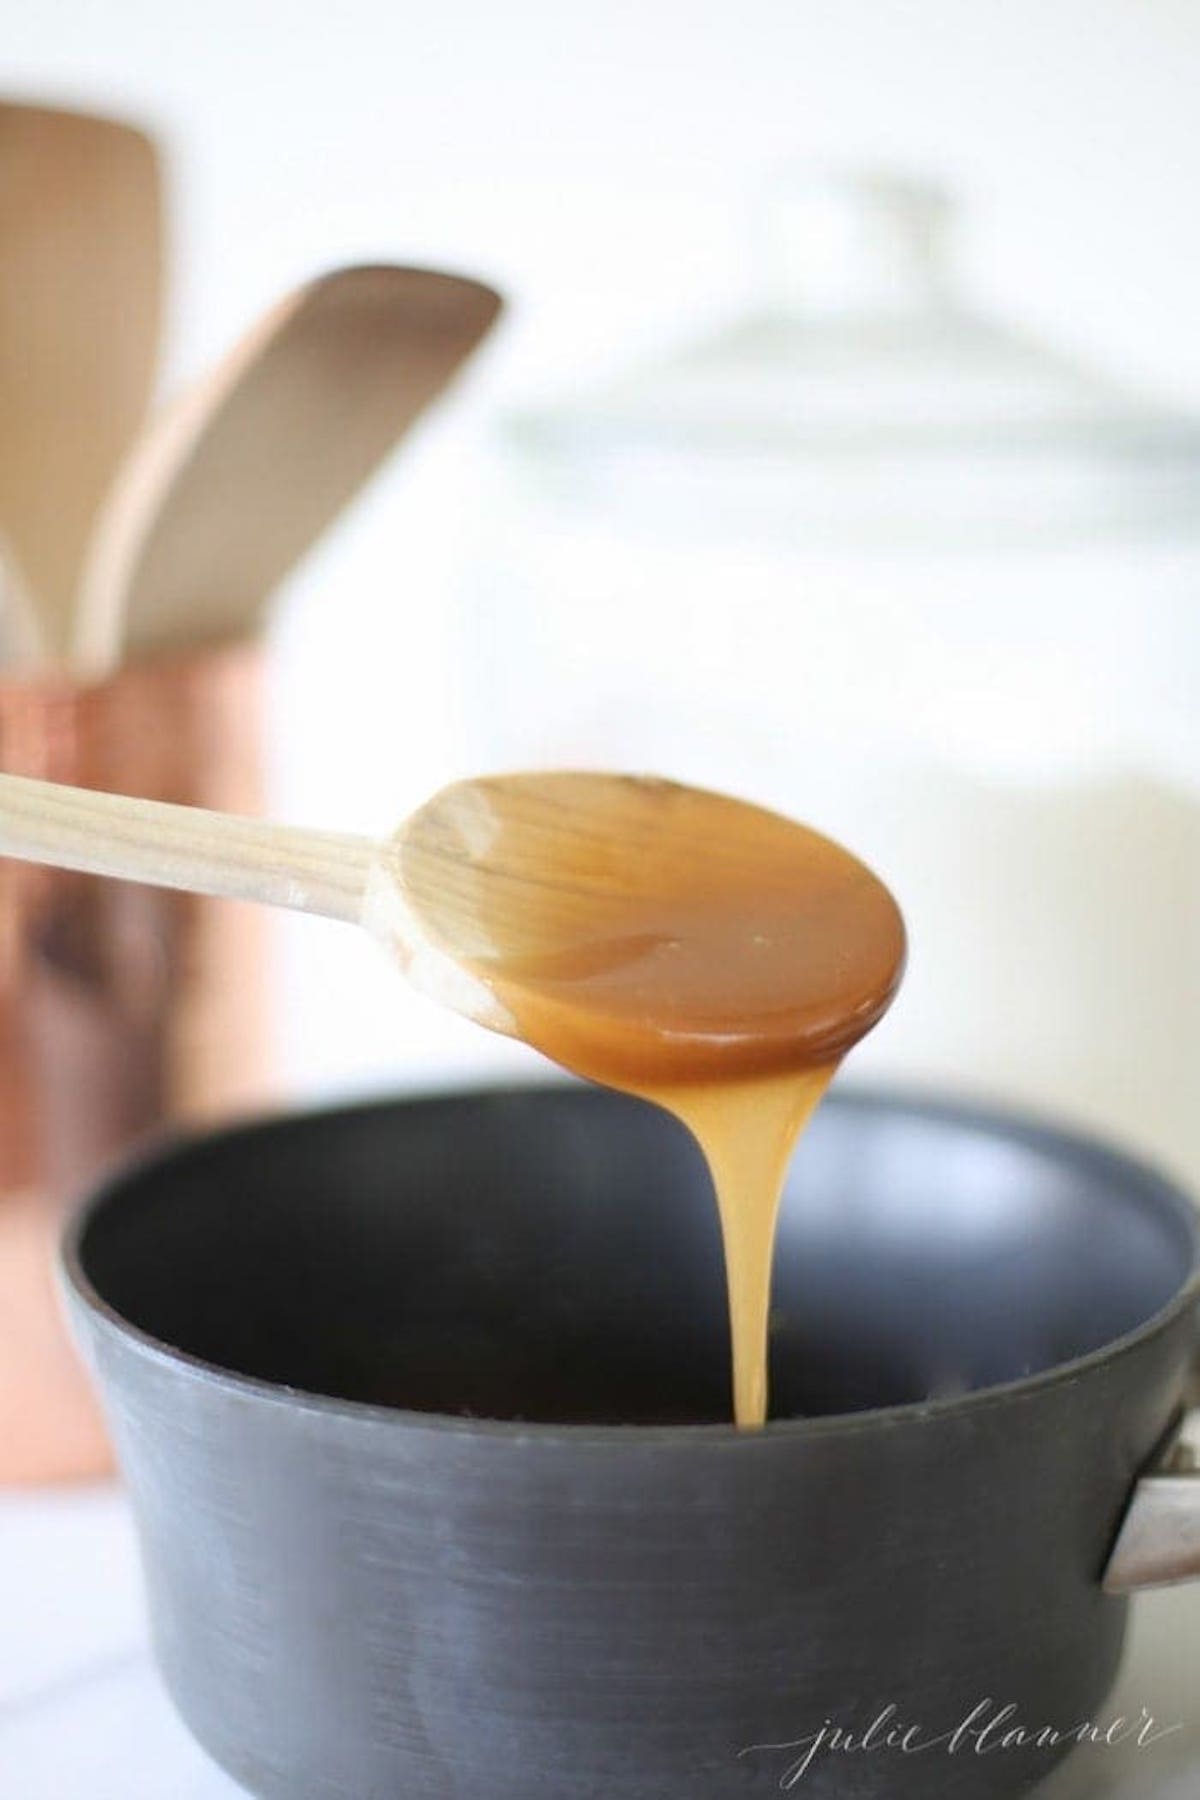 Salted caramel sauce being poured into a pan.